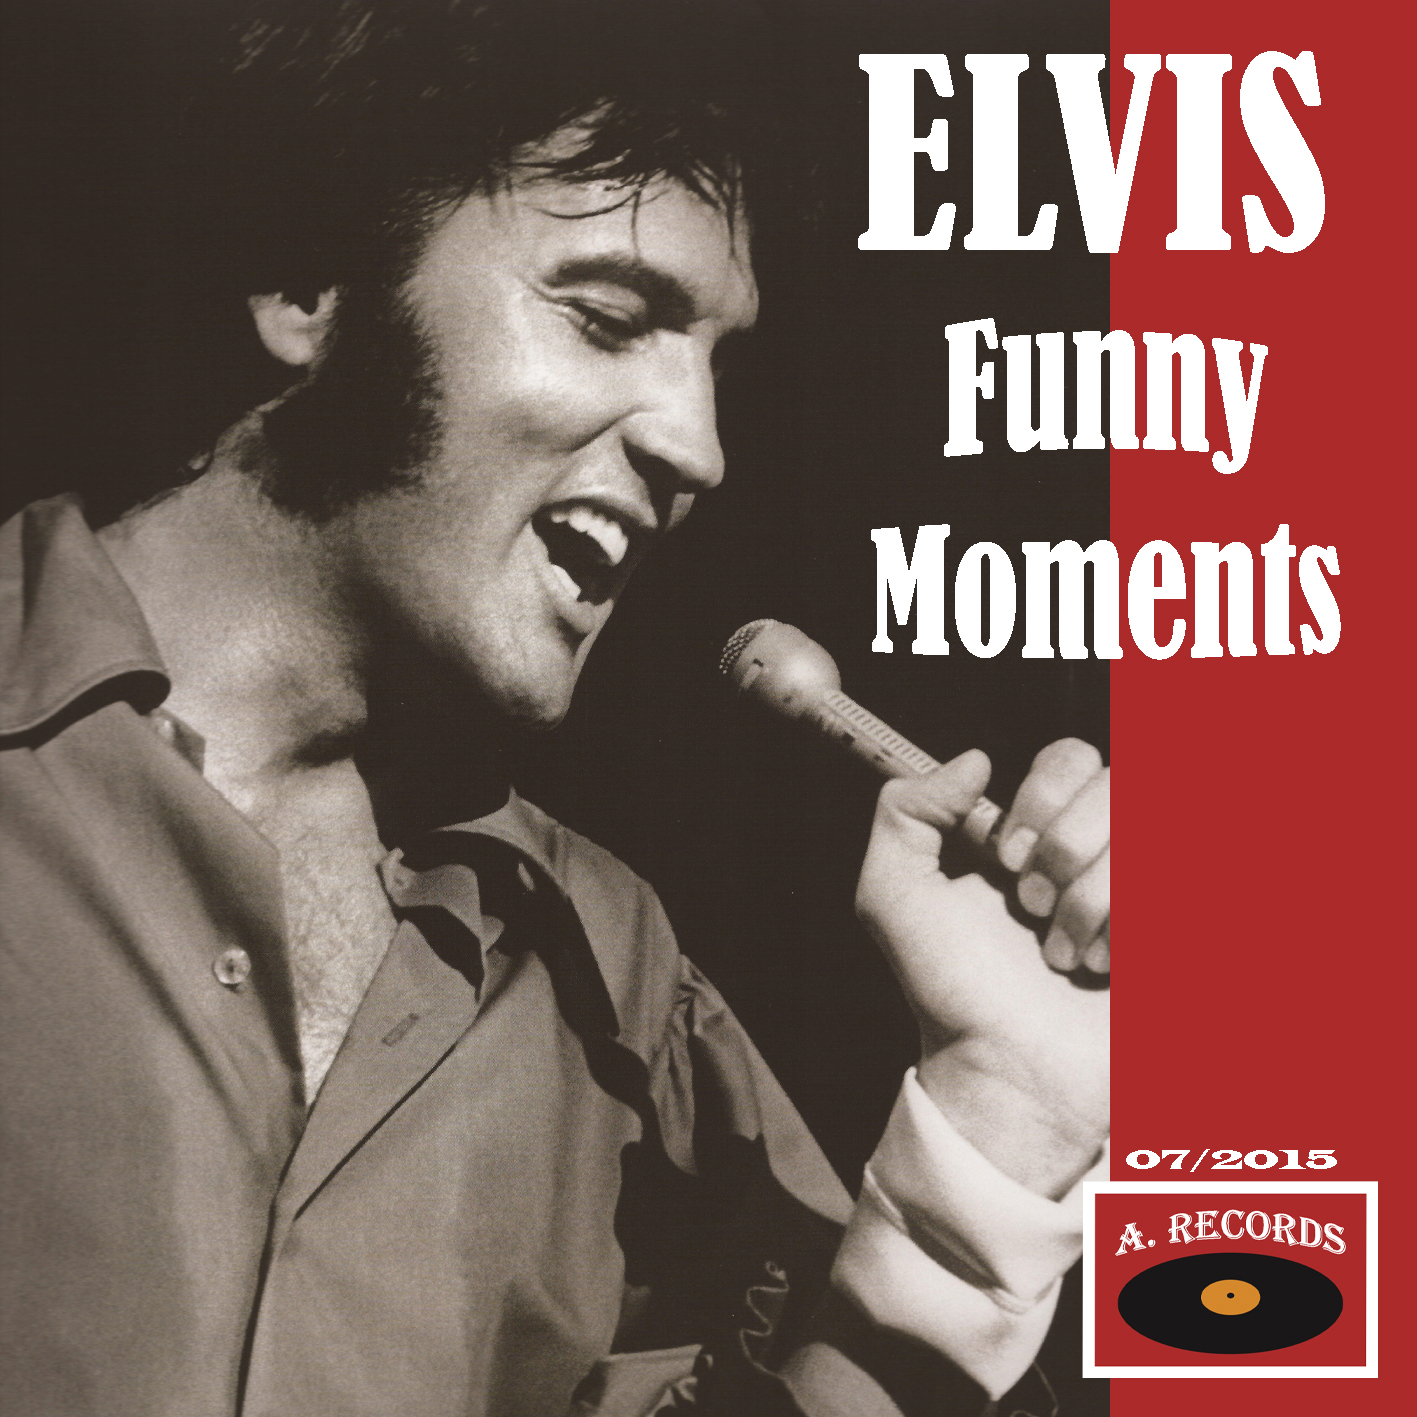 Elvis Funny Moments (July 2015)